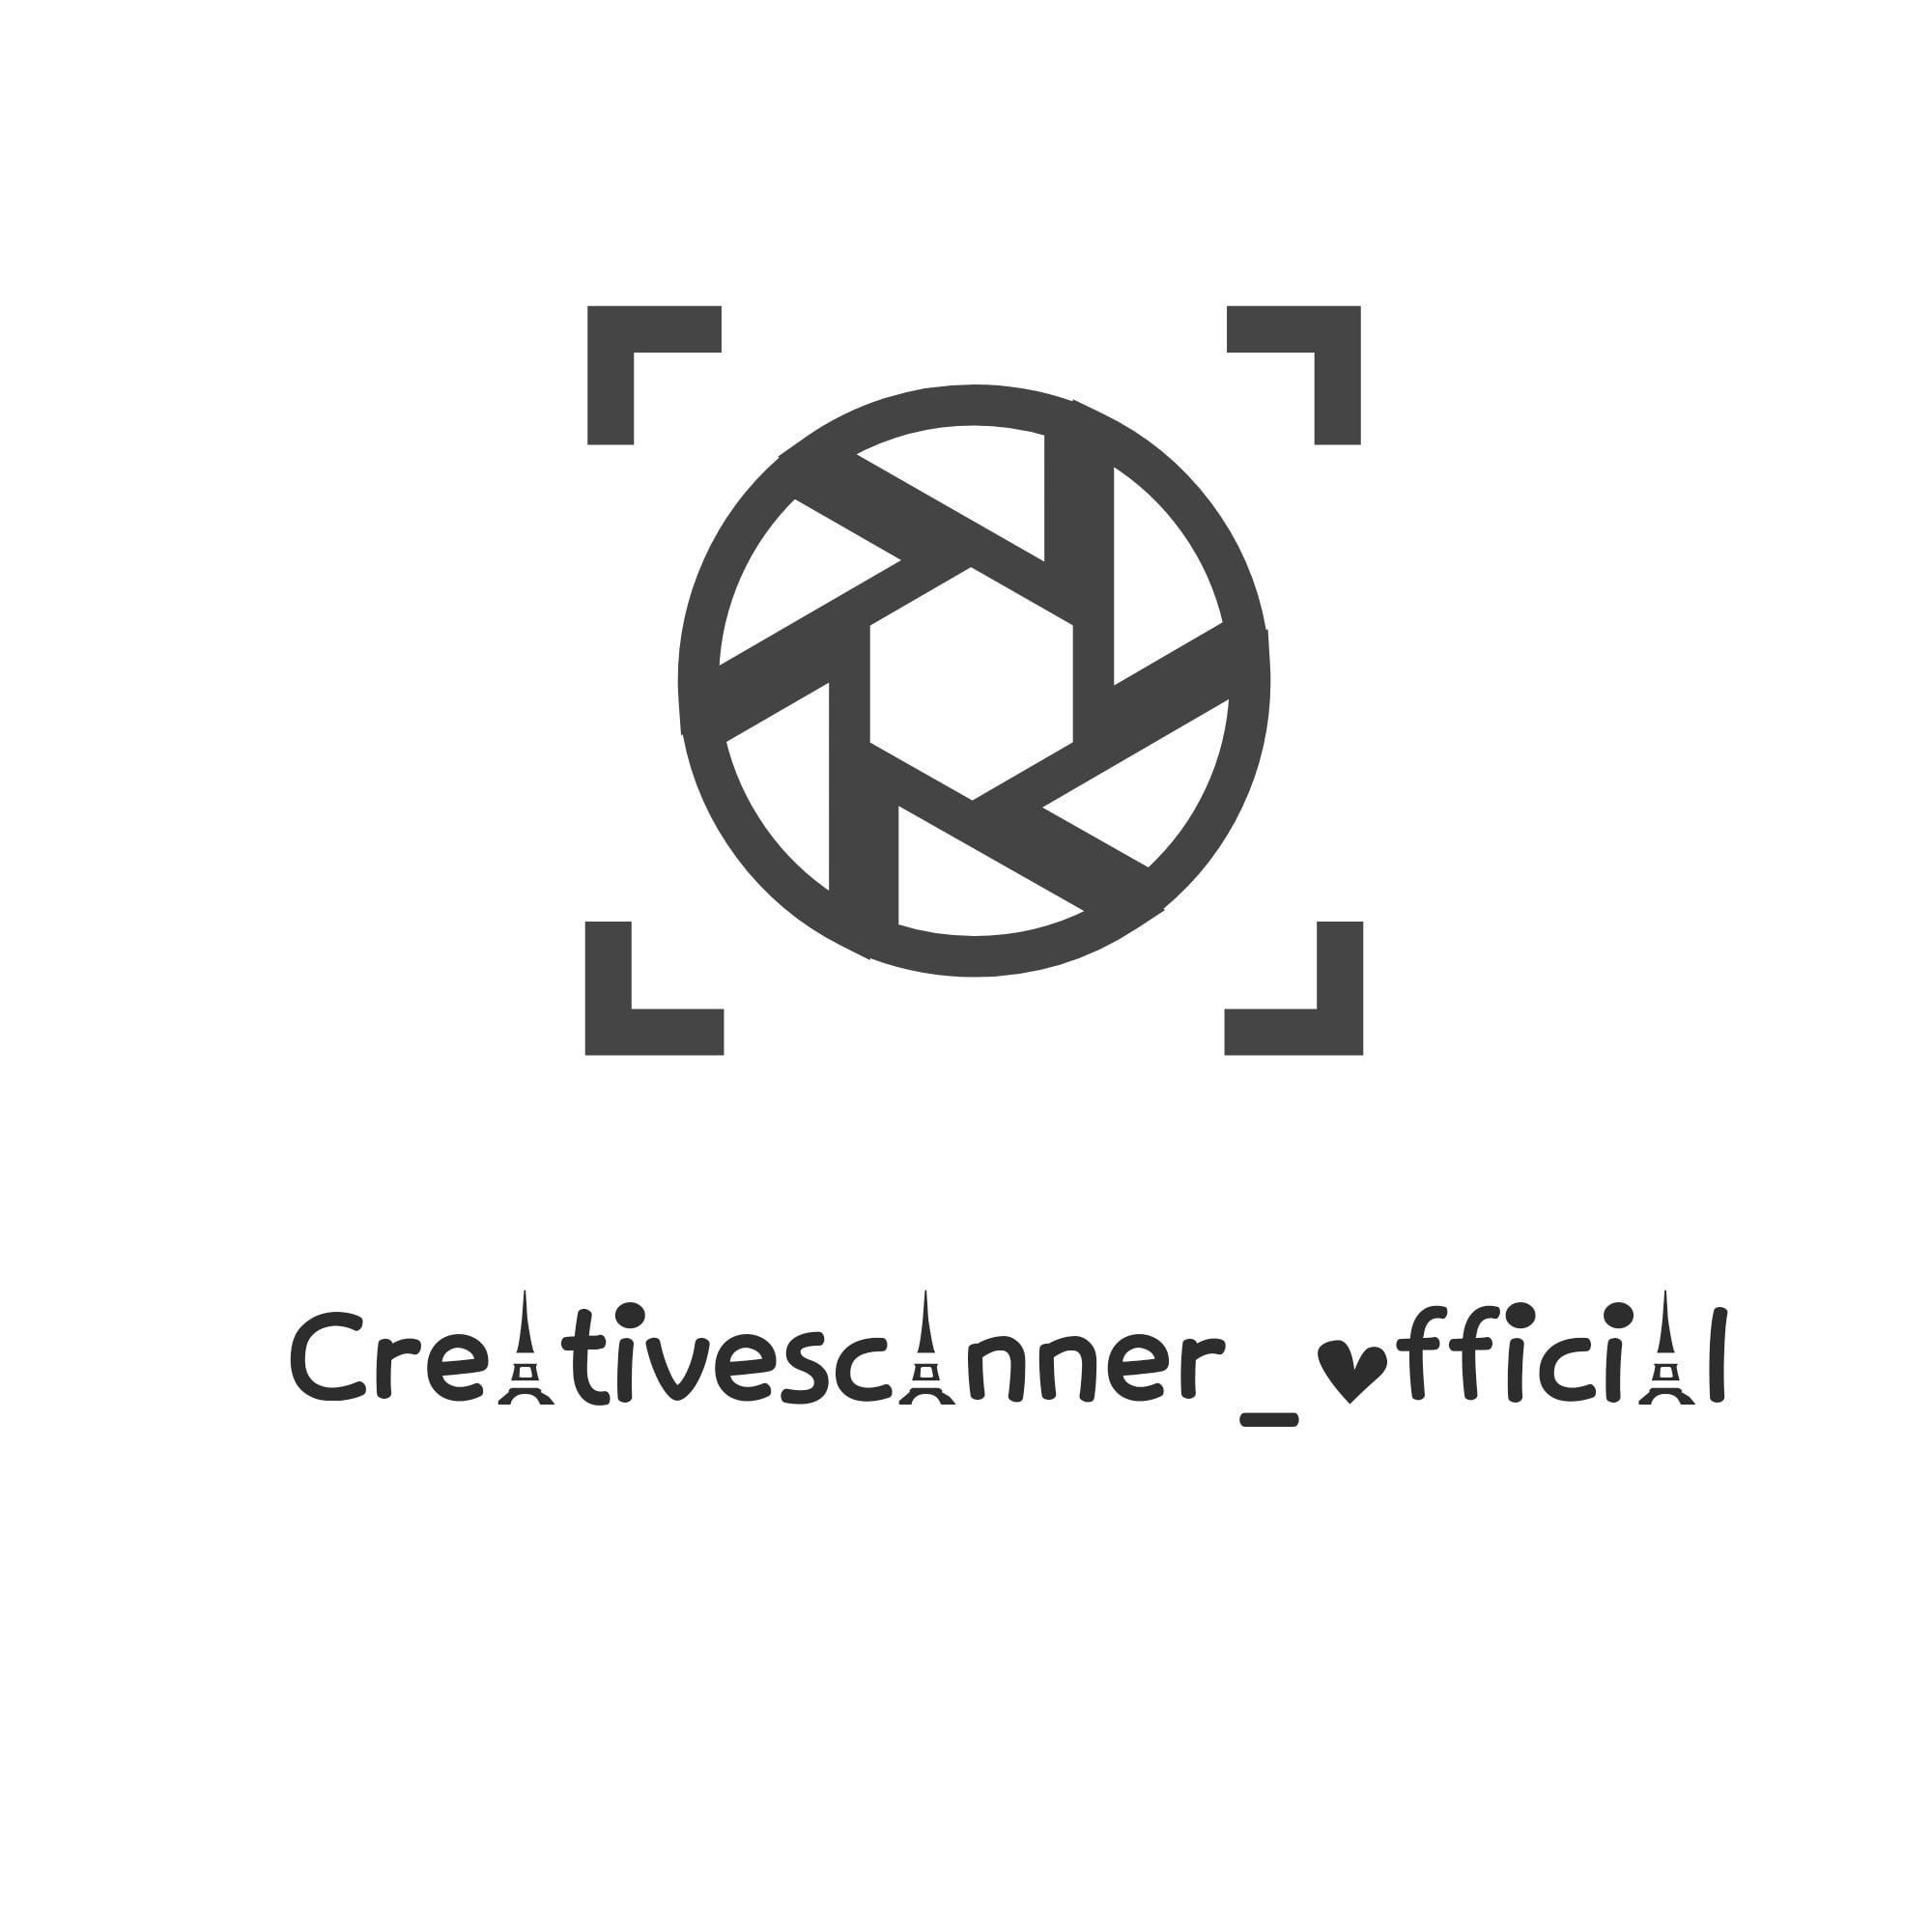 Creative Scanner Official